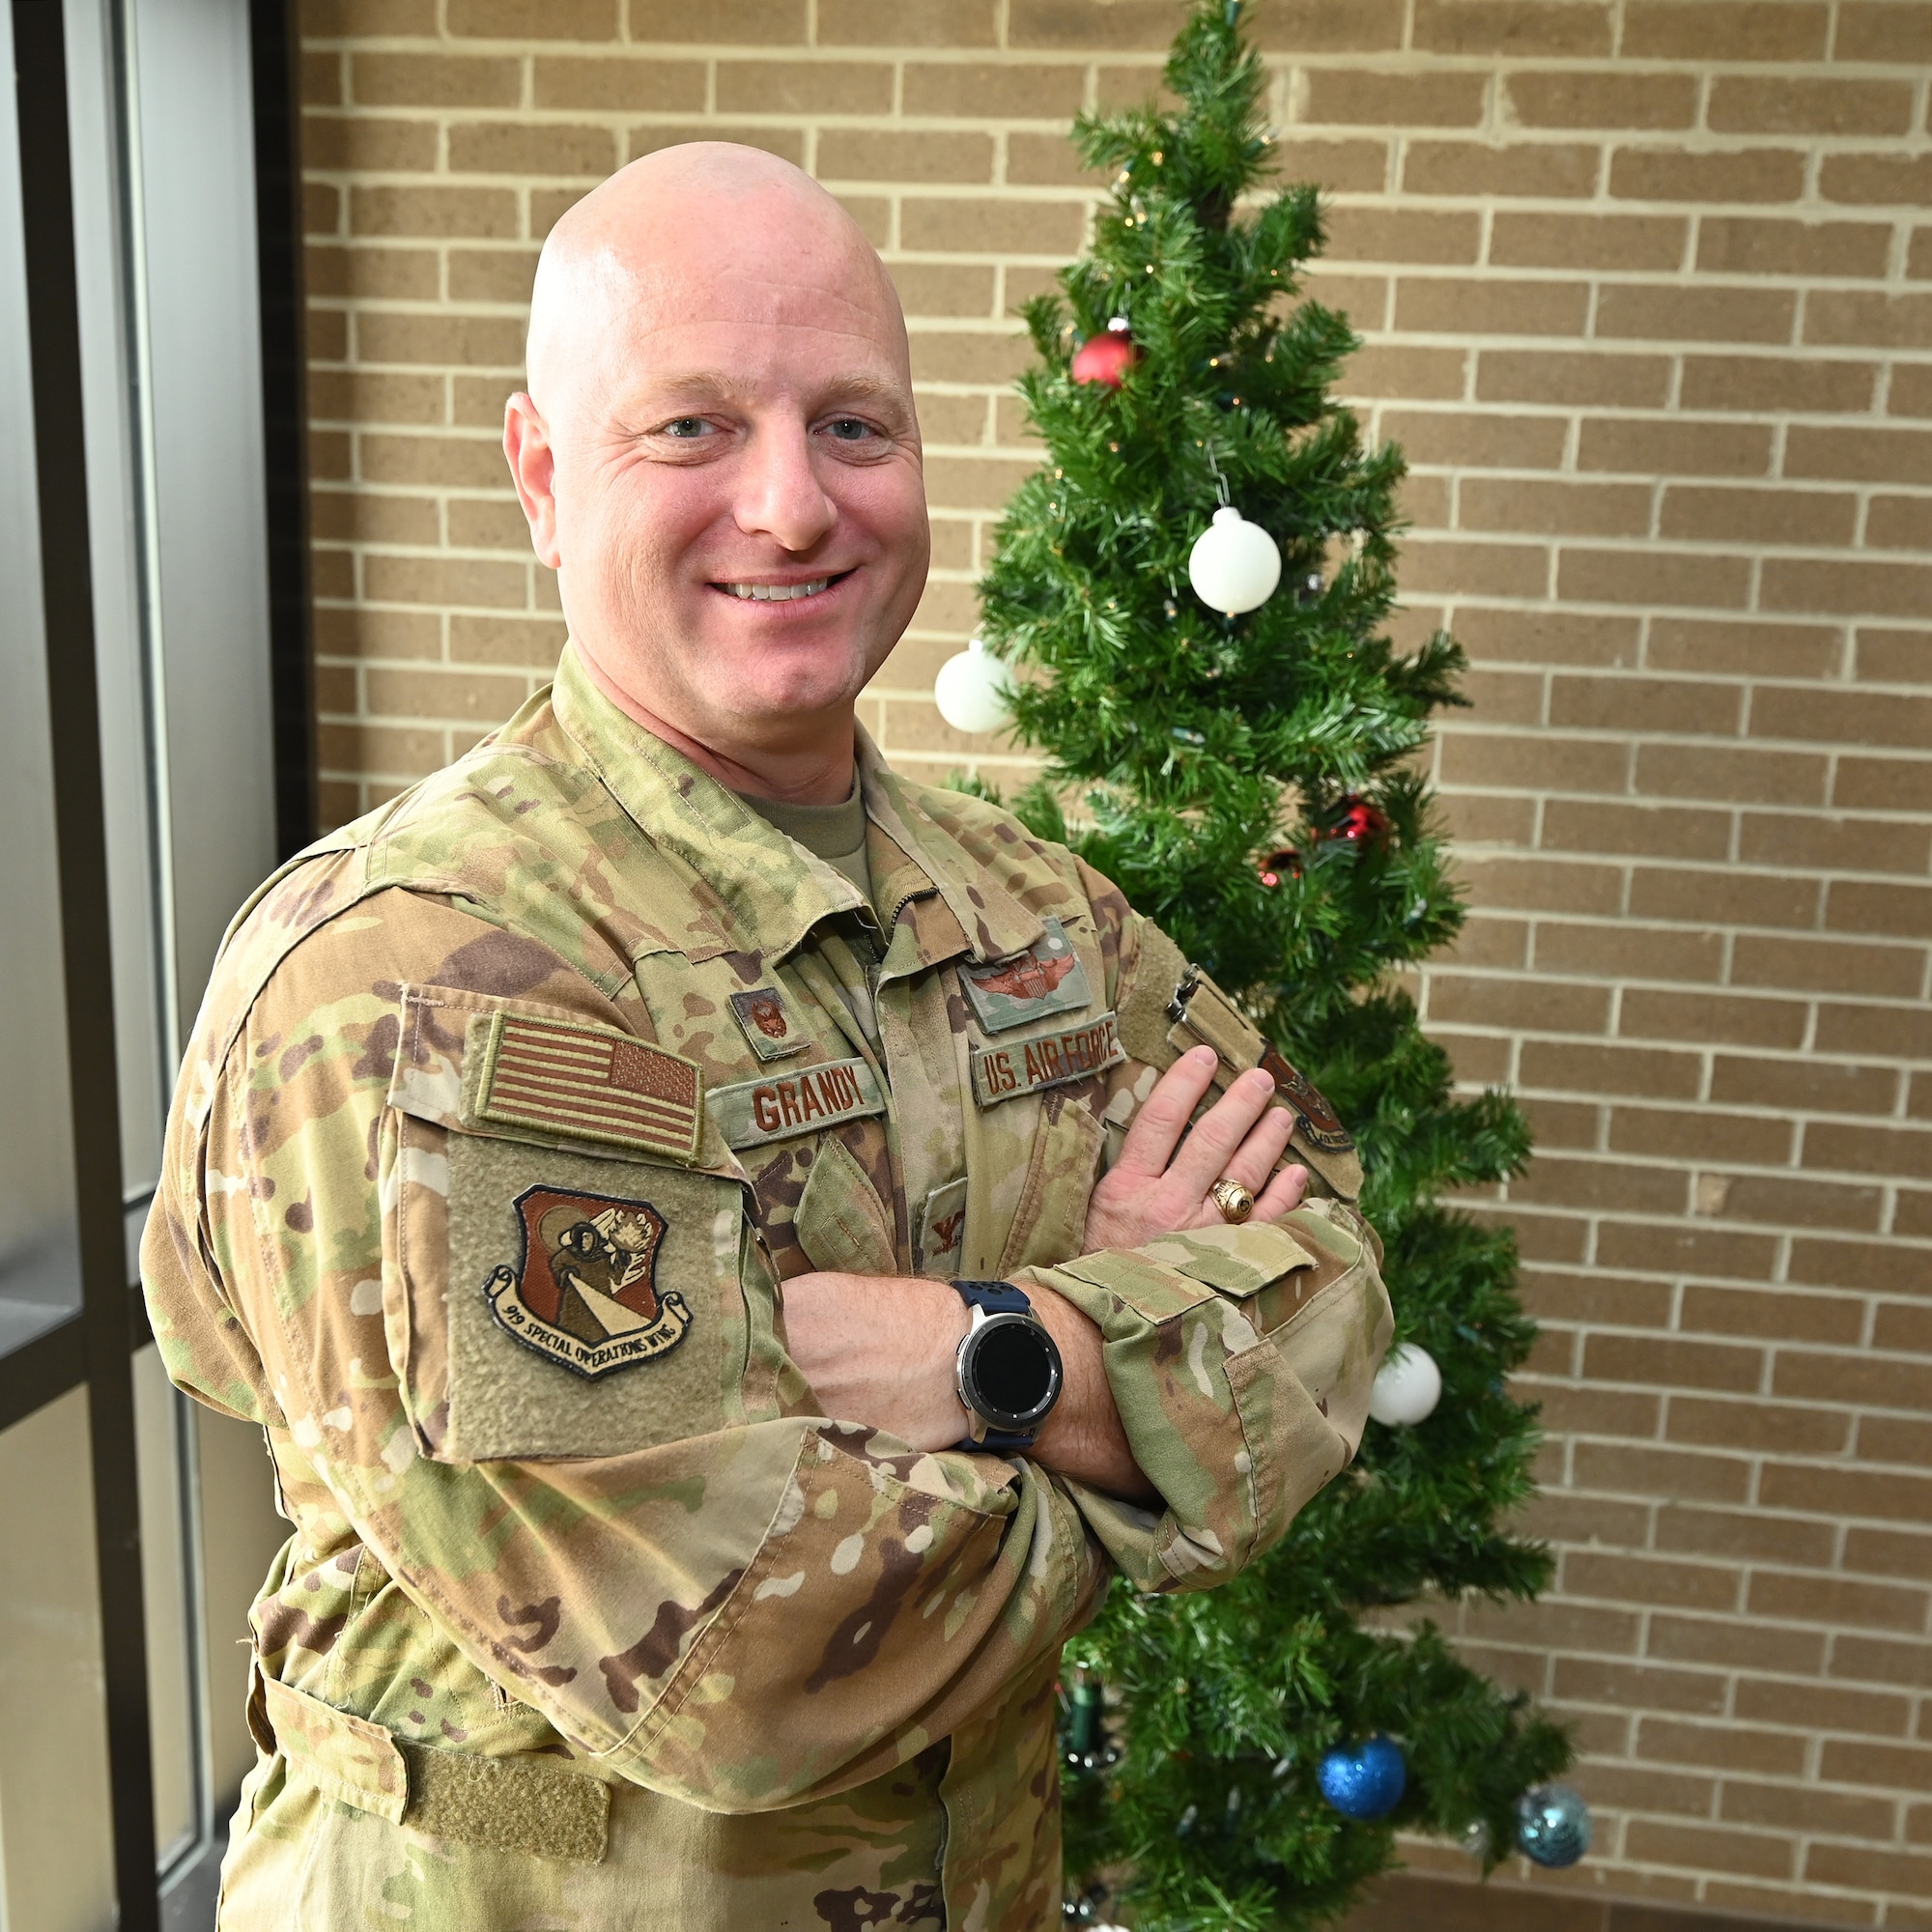 Airman stands in front of Christmas tree with brick wall background.